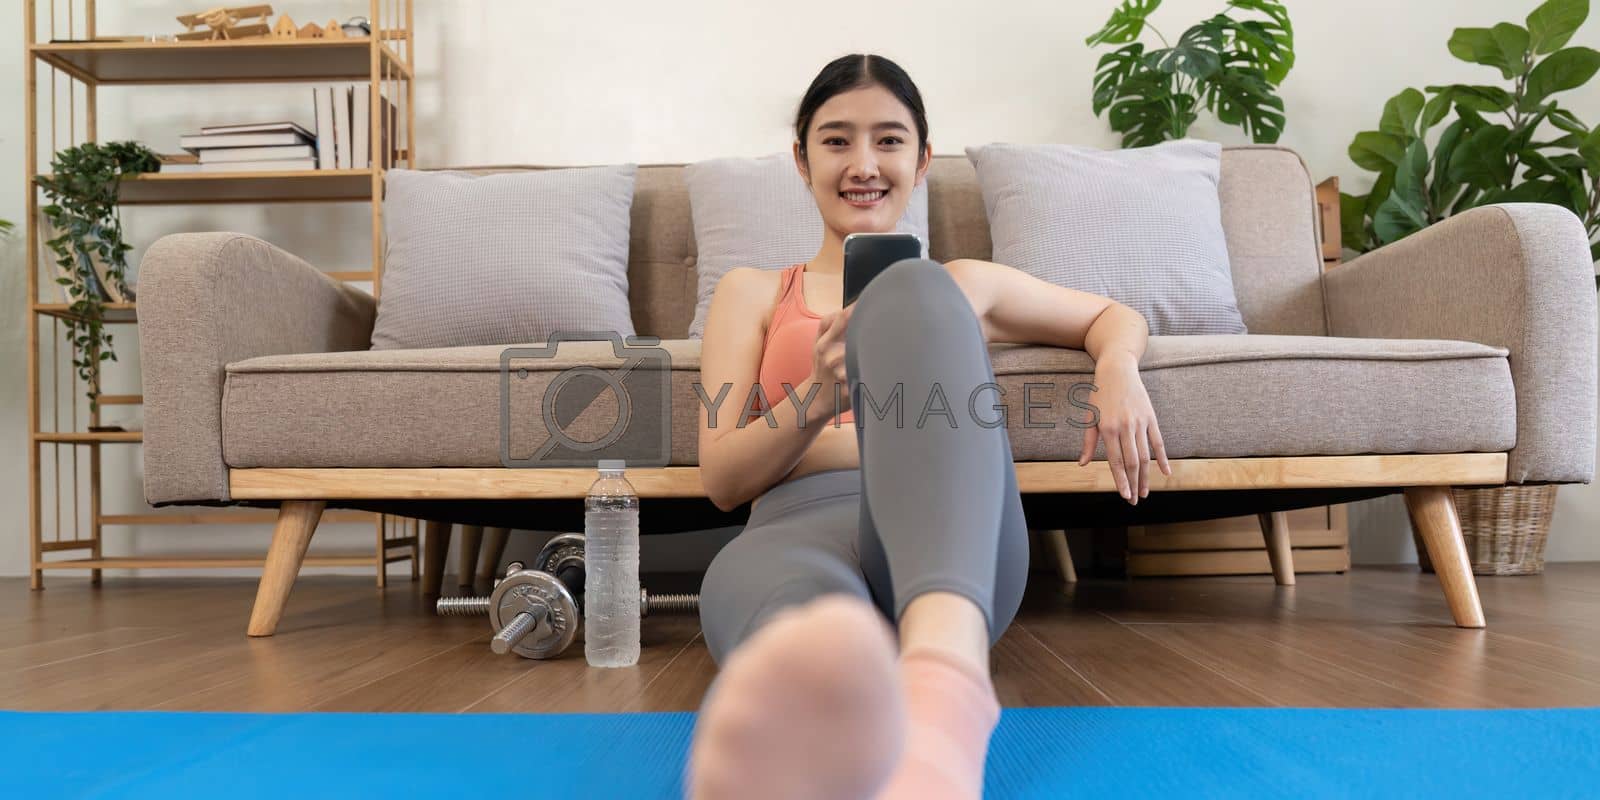 Royalty free image of young woman exercising at home happily sitting and resting playing on the mobile phone by nateemee